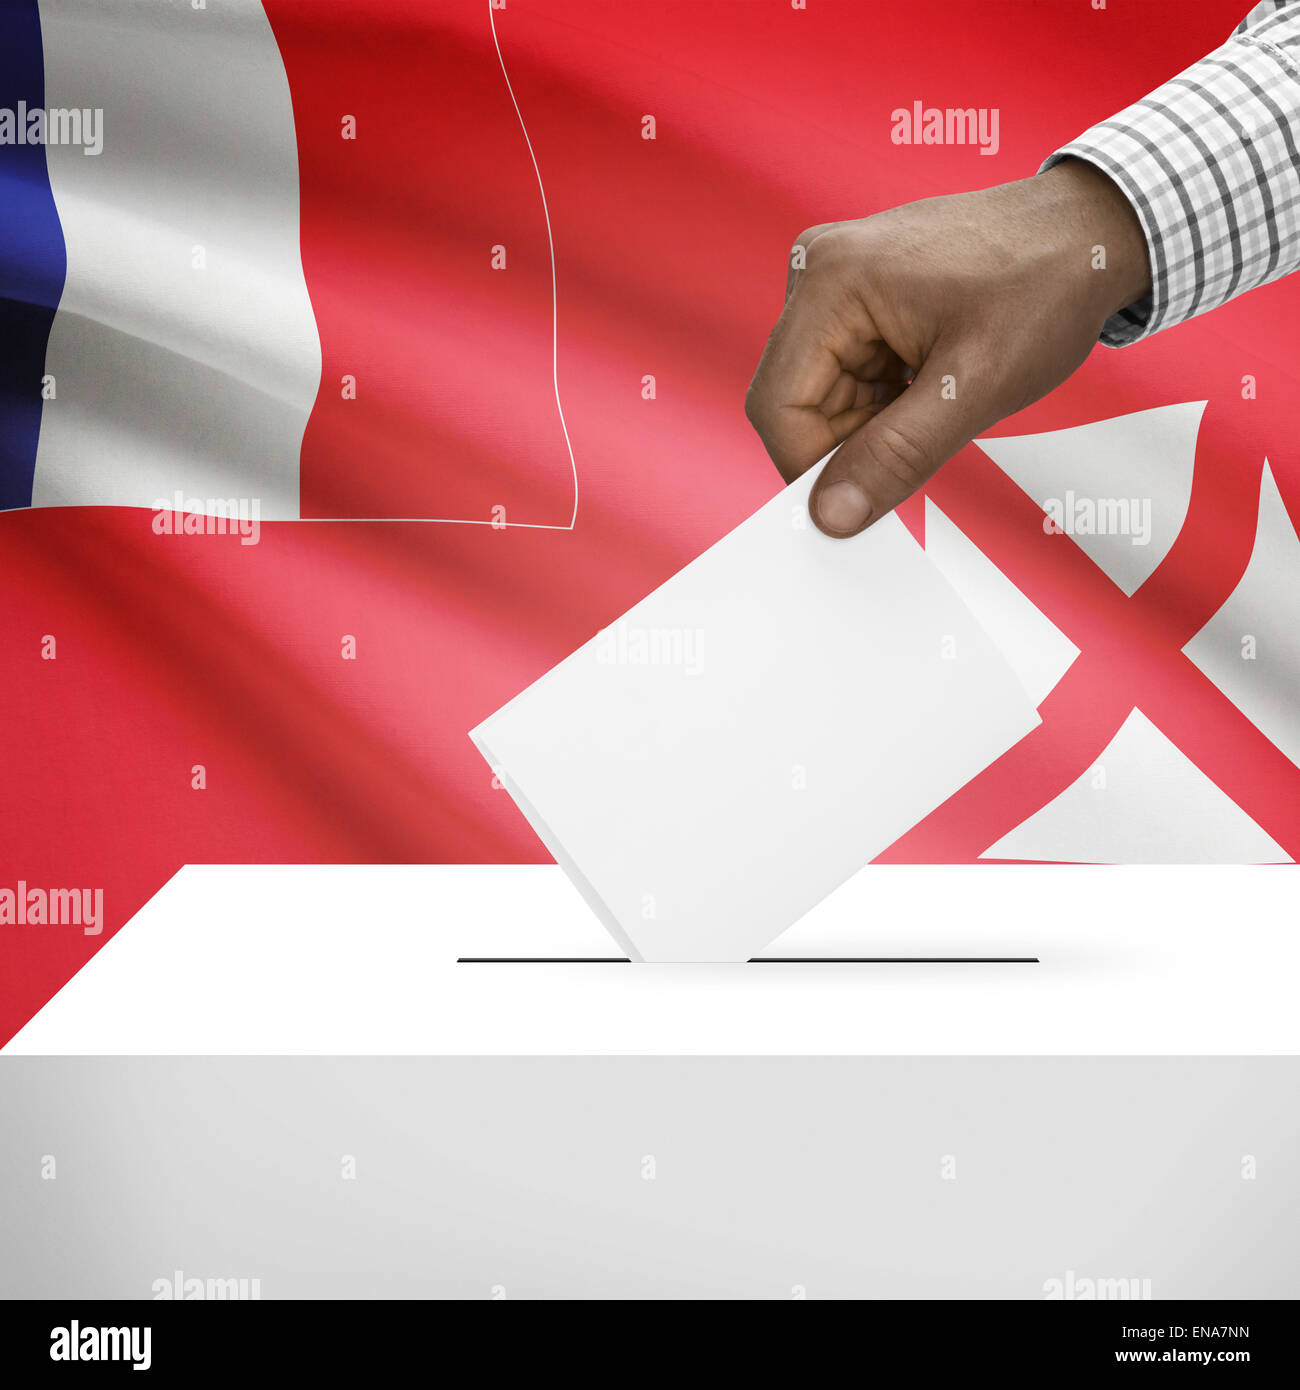 Ballot box with flag on background - Territory of the Wallis and Futuna Islands Stock Photo